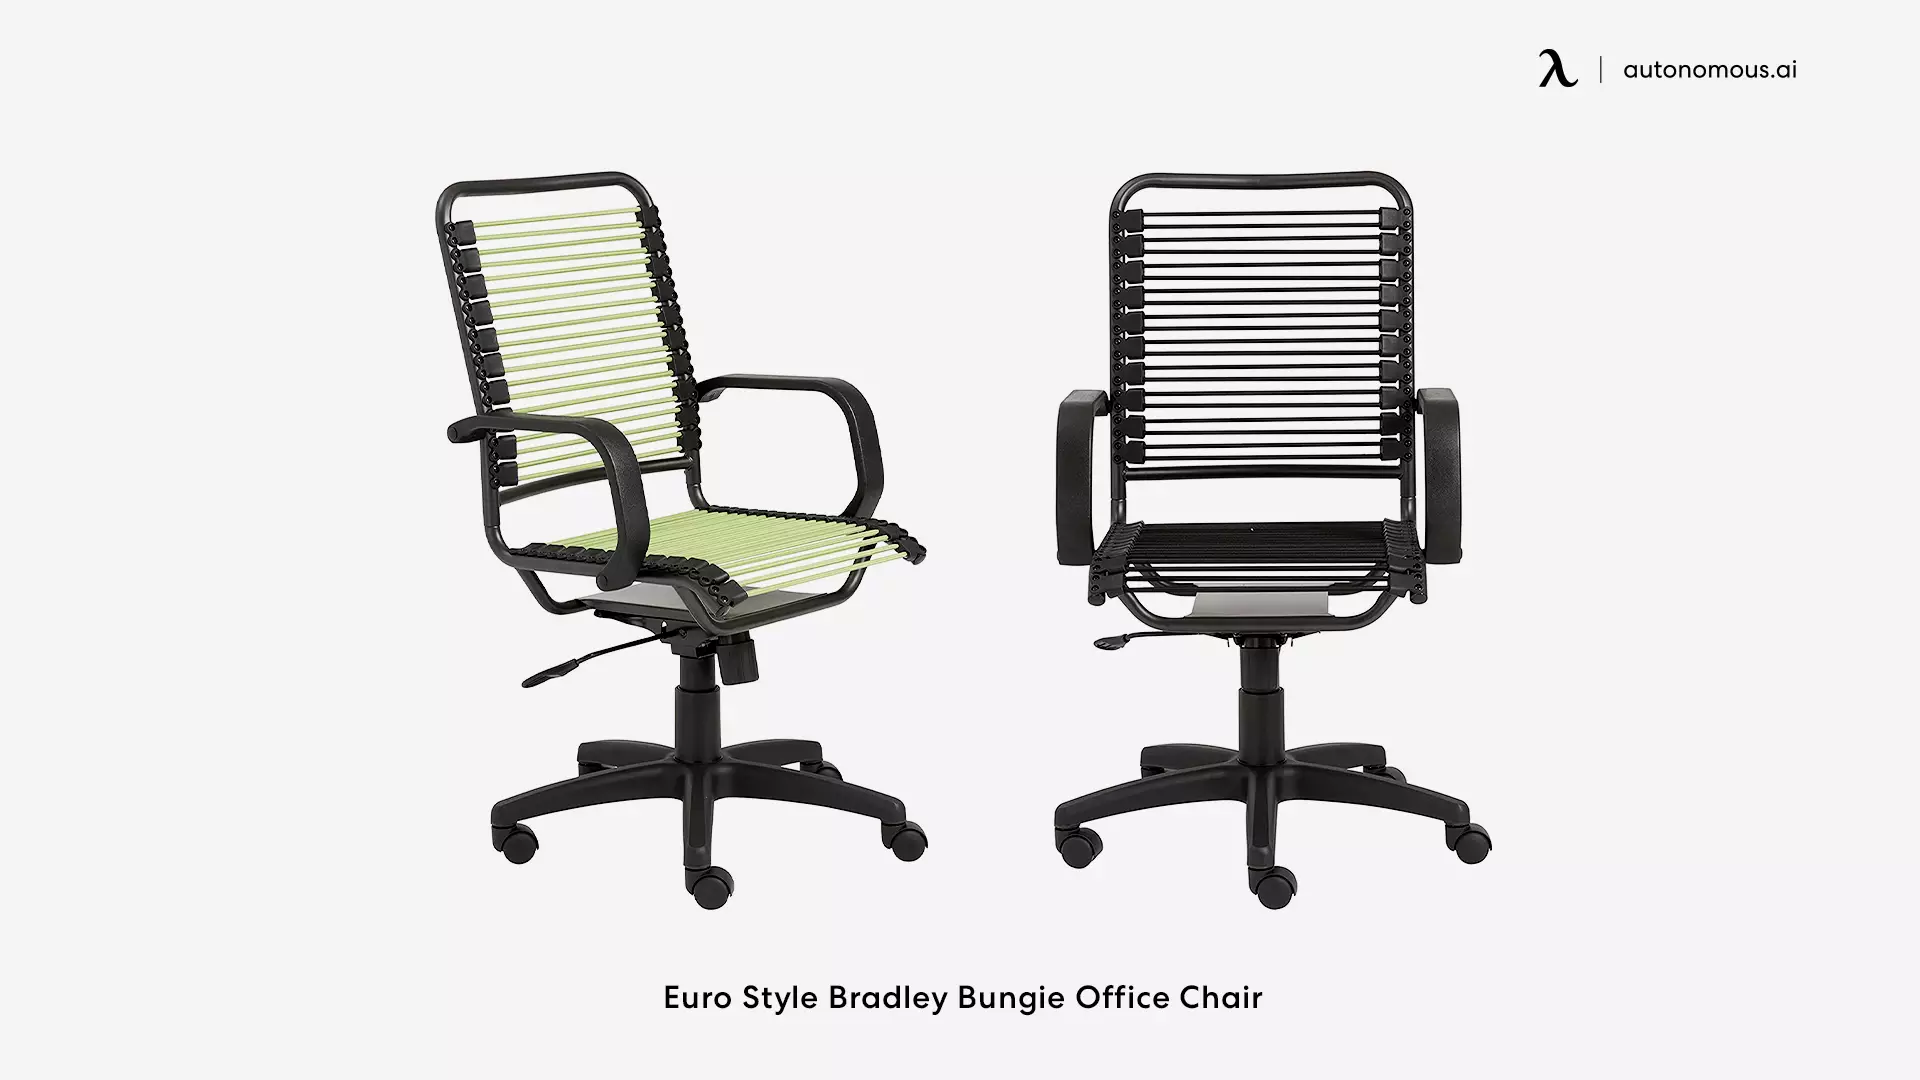 Euro Style Bradley Bungie green office chair